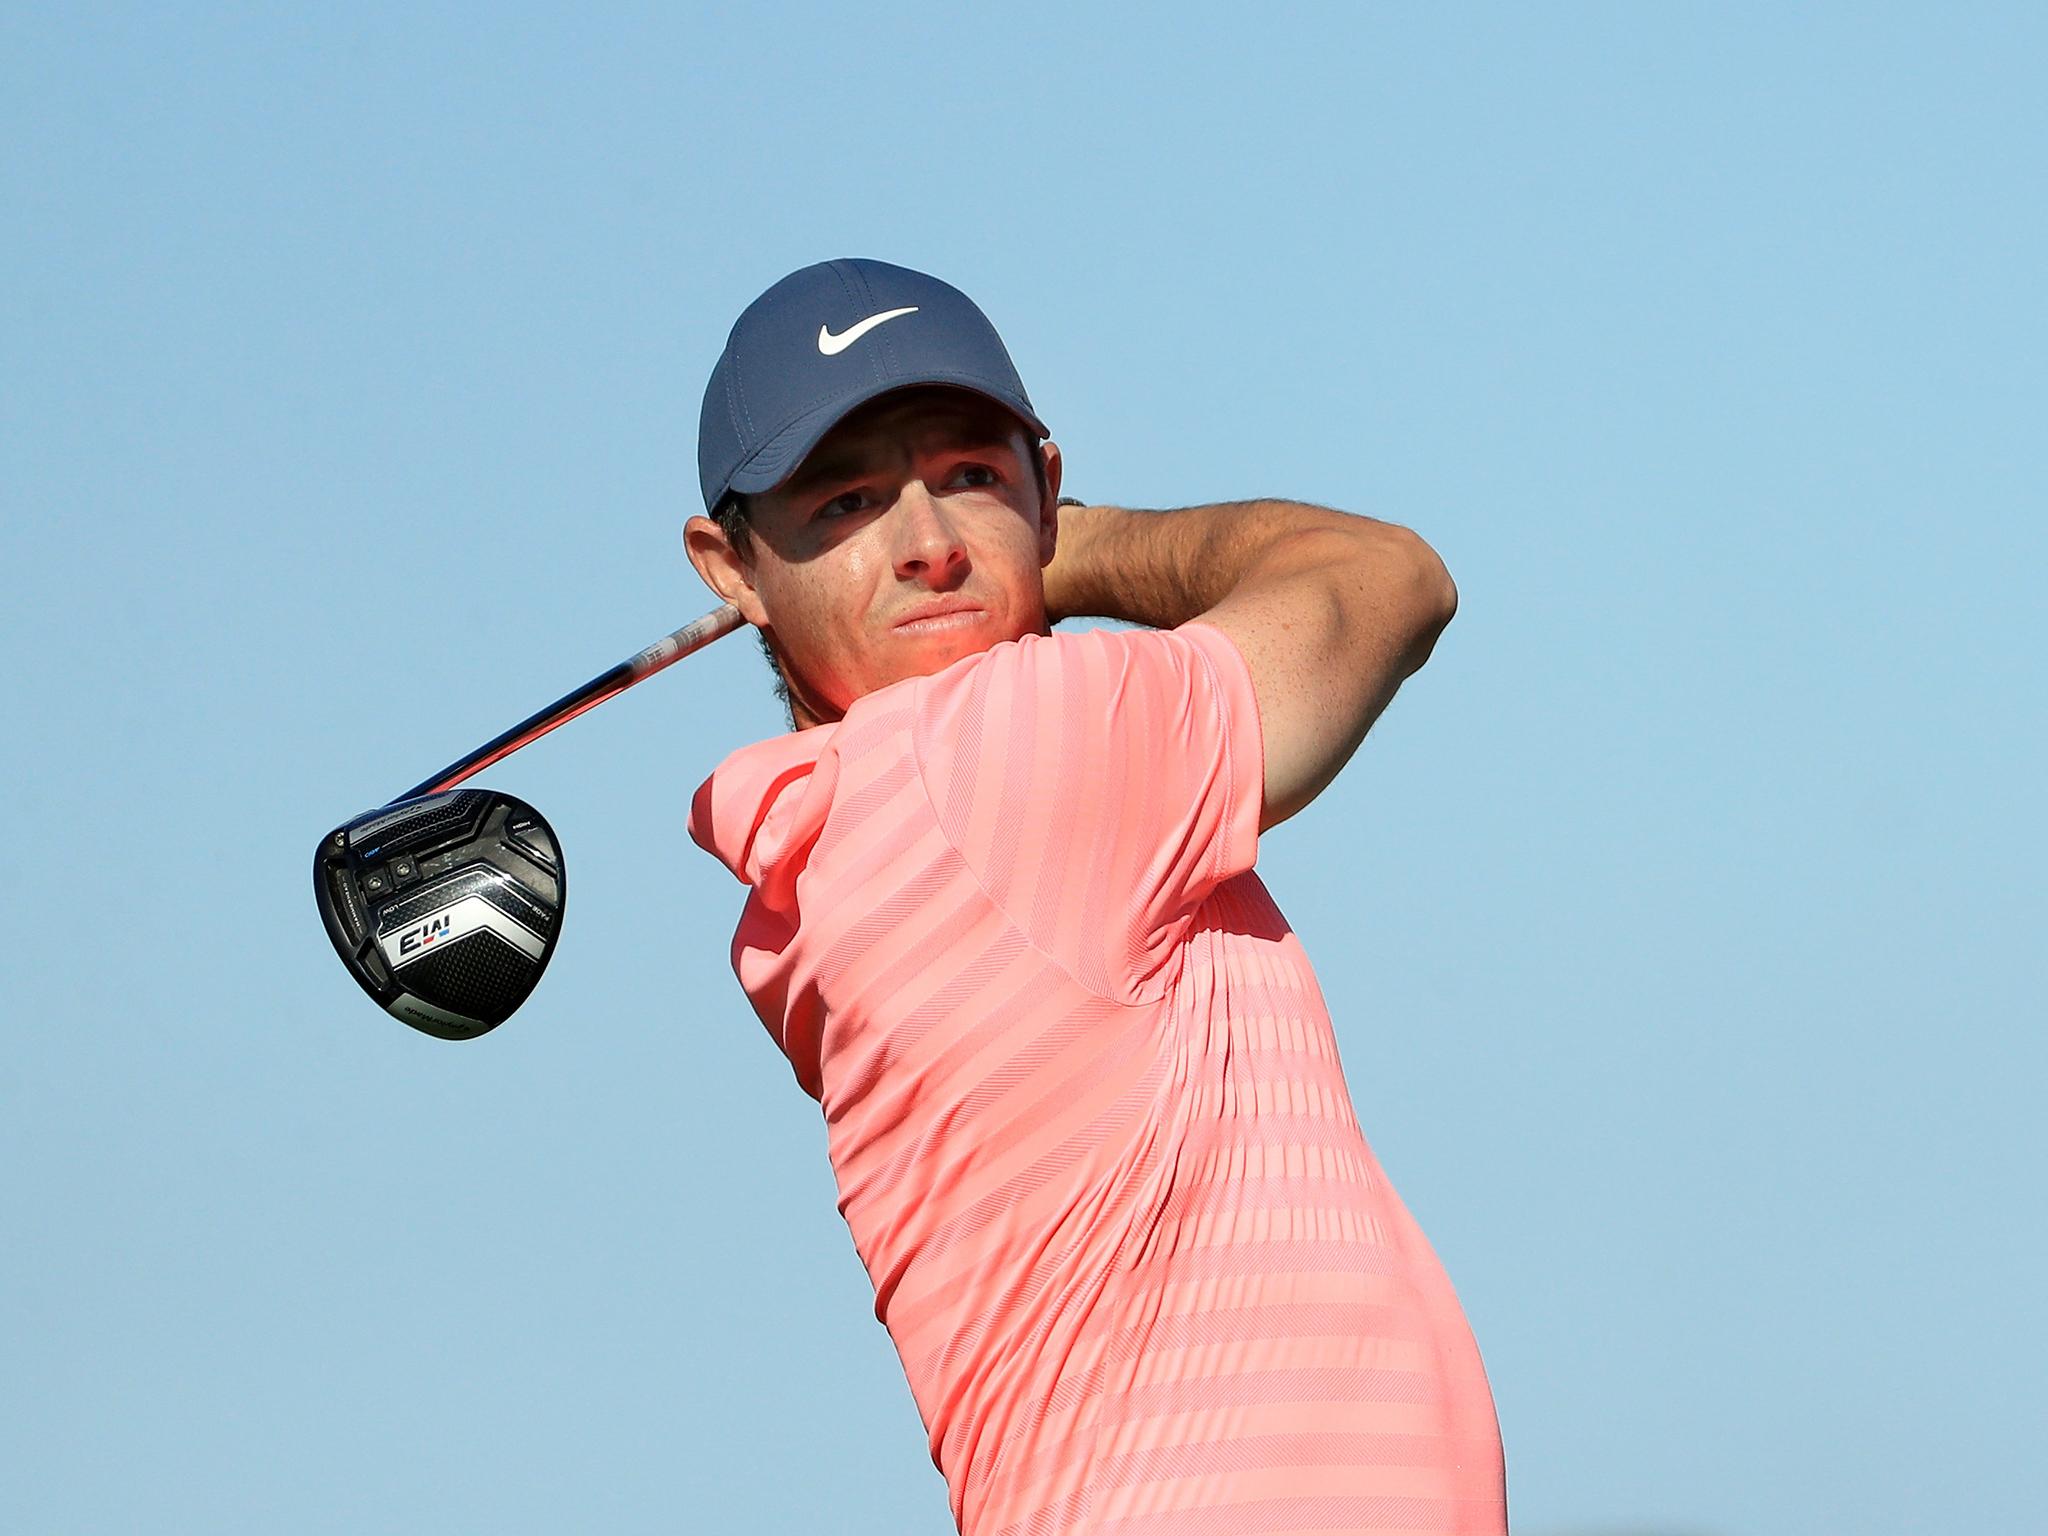 Rory McIlroy is three shots behind joint-leaders Kevin Streelman and Beau Hossler at the AT&T Pebble Beach Pro-Am